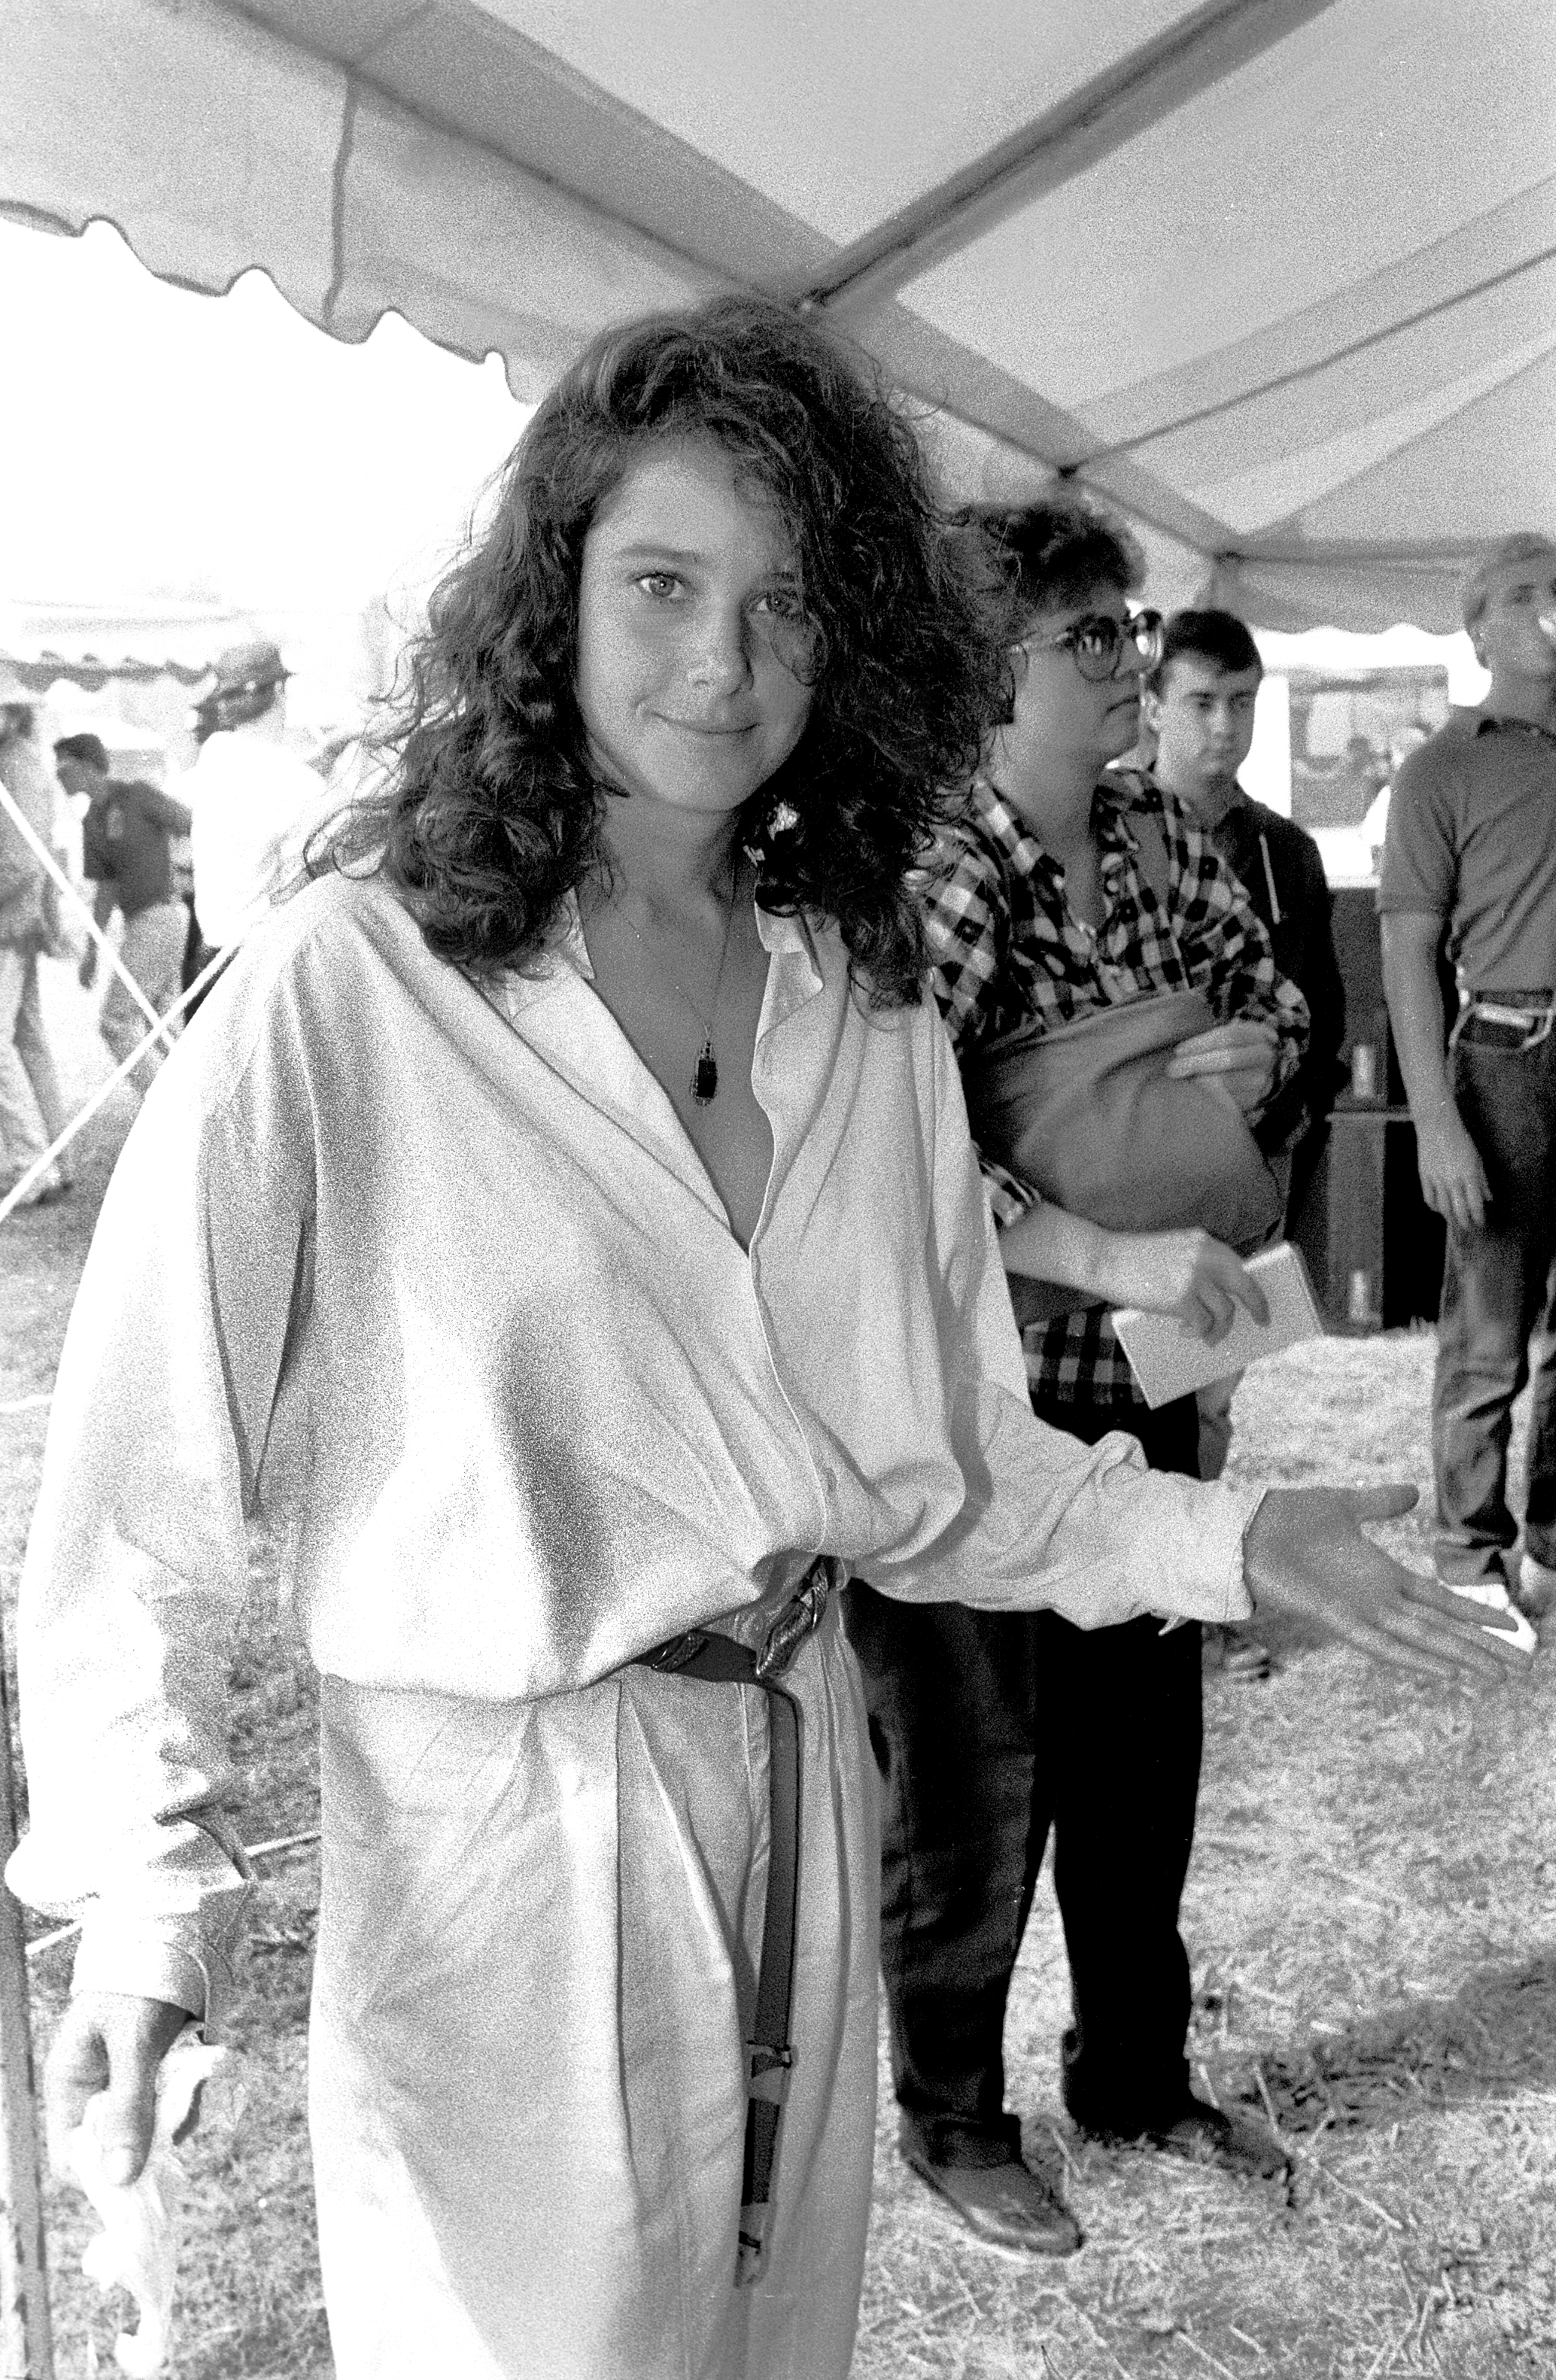 Debra Winger at the inaugural Farm Aid benefit concert at Veteran's Stadium on September 22, 1985, in Champaign, Illinois. | Source: Getty Images